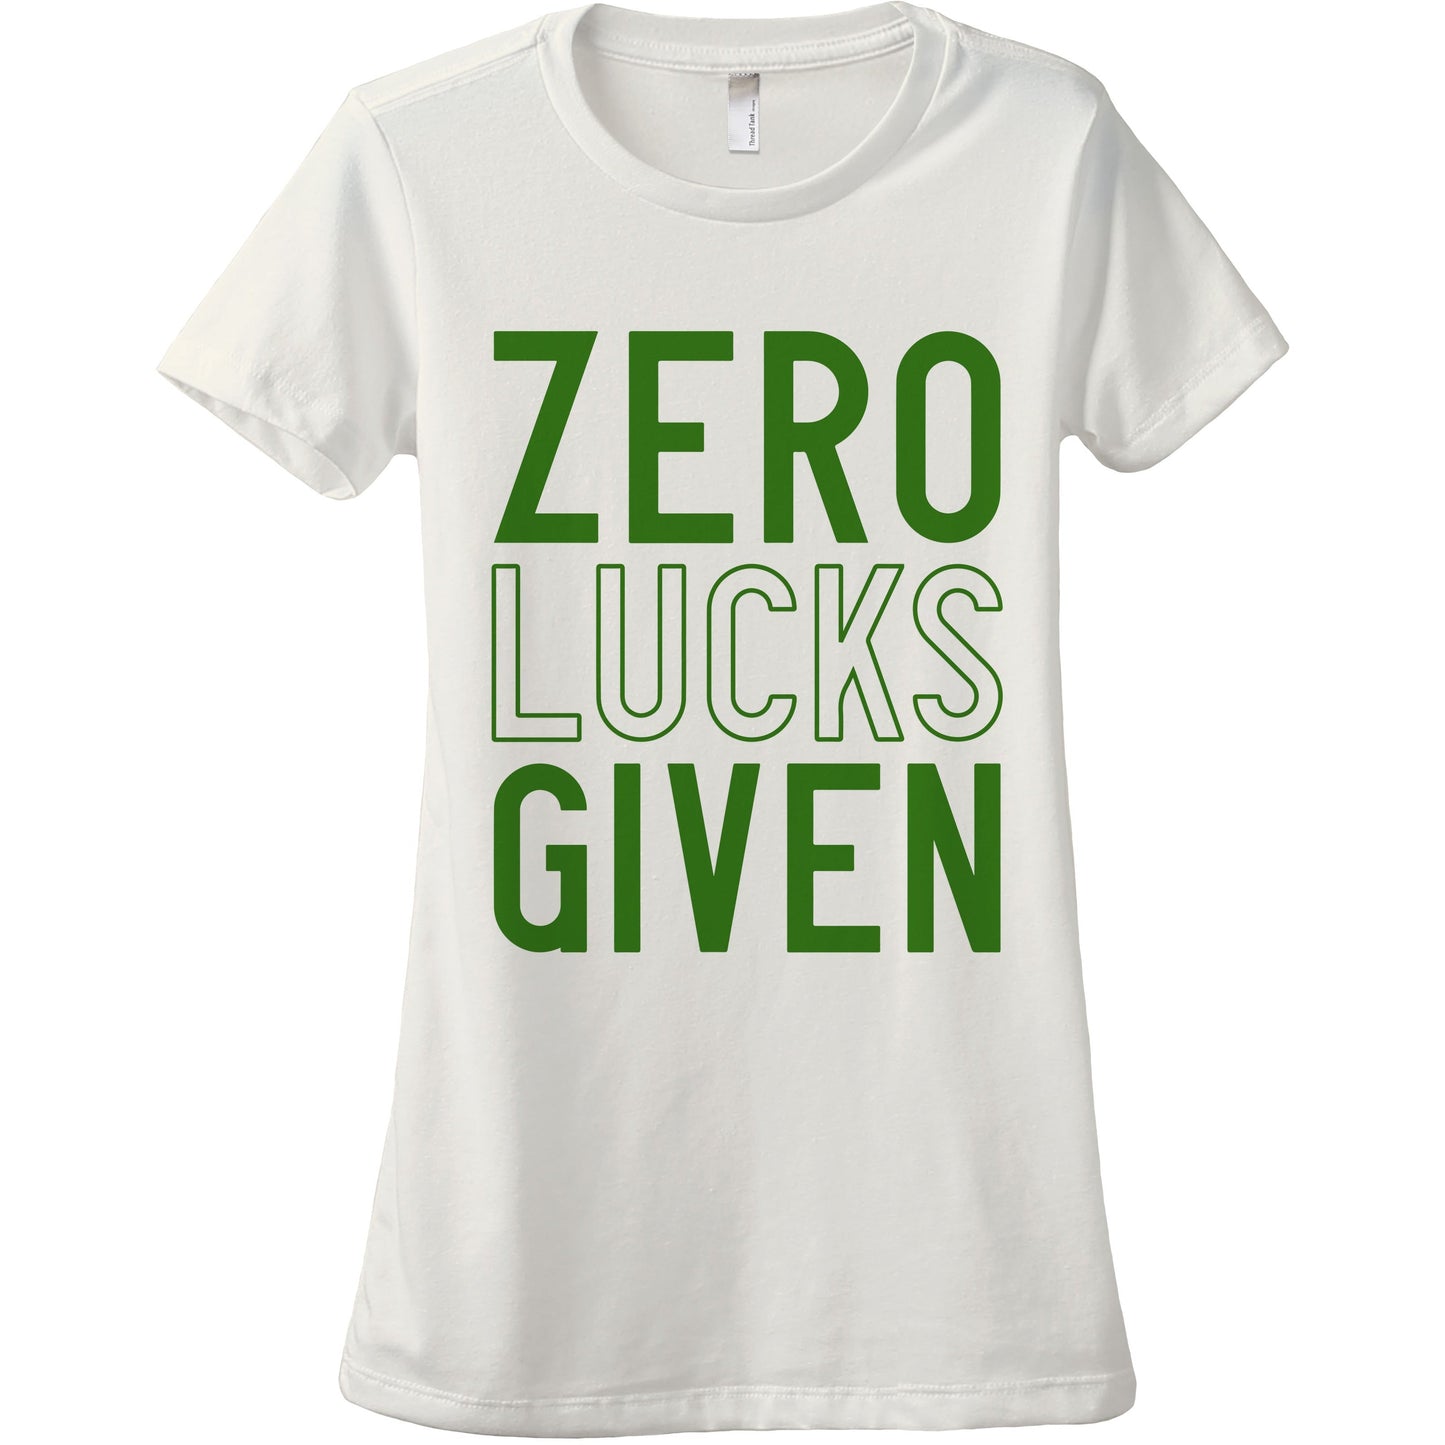 Zero Lucks Given - Stories You Can Wear